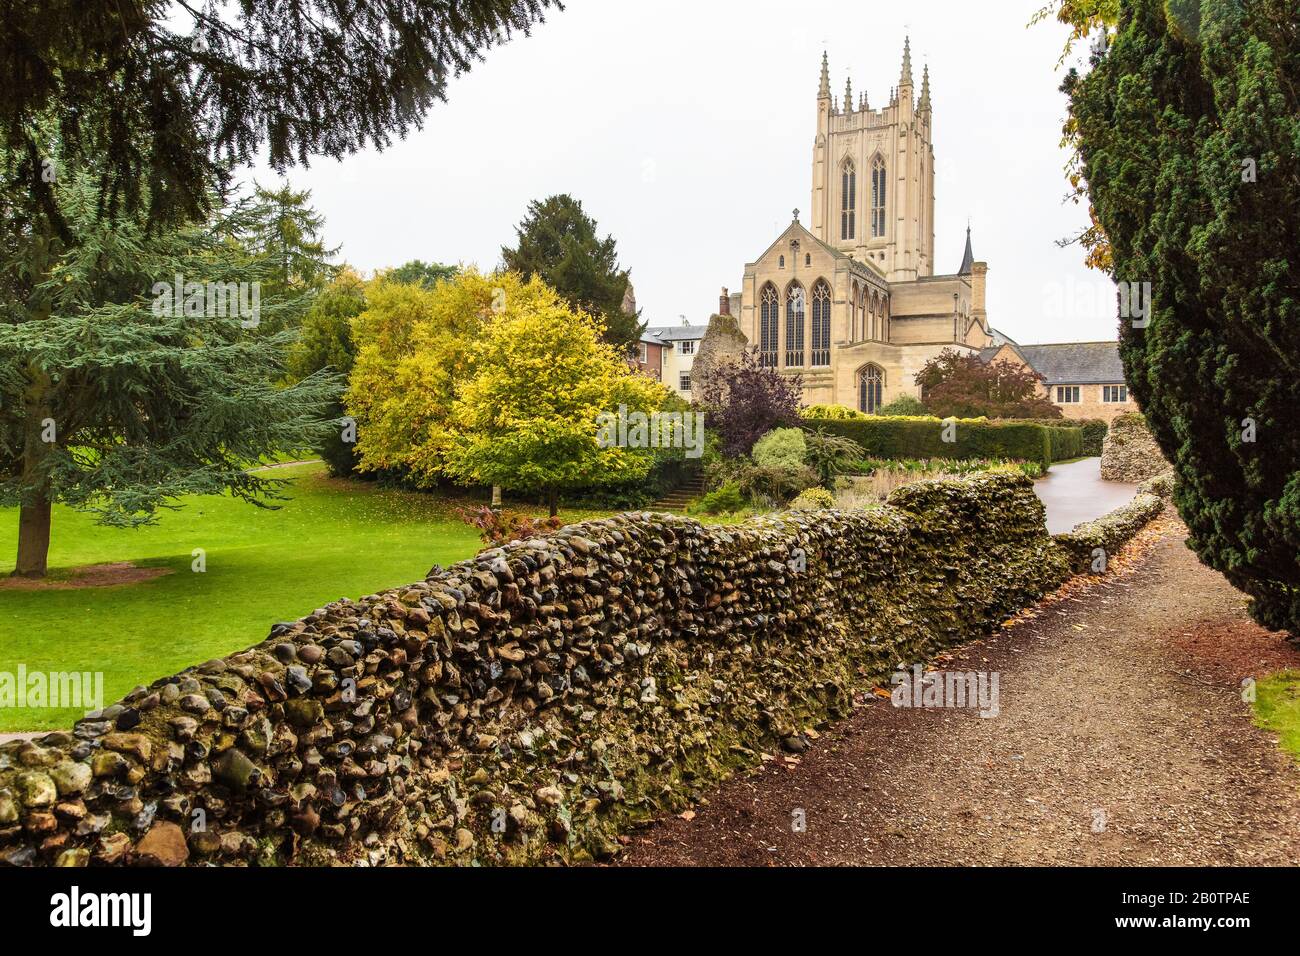 Bury St Edmunds Cathedral England. Blissful church grounds on a dreary misty autumn's day. Stock Photo